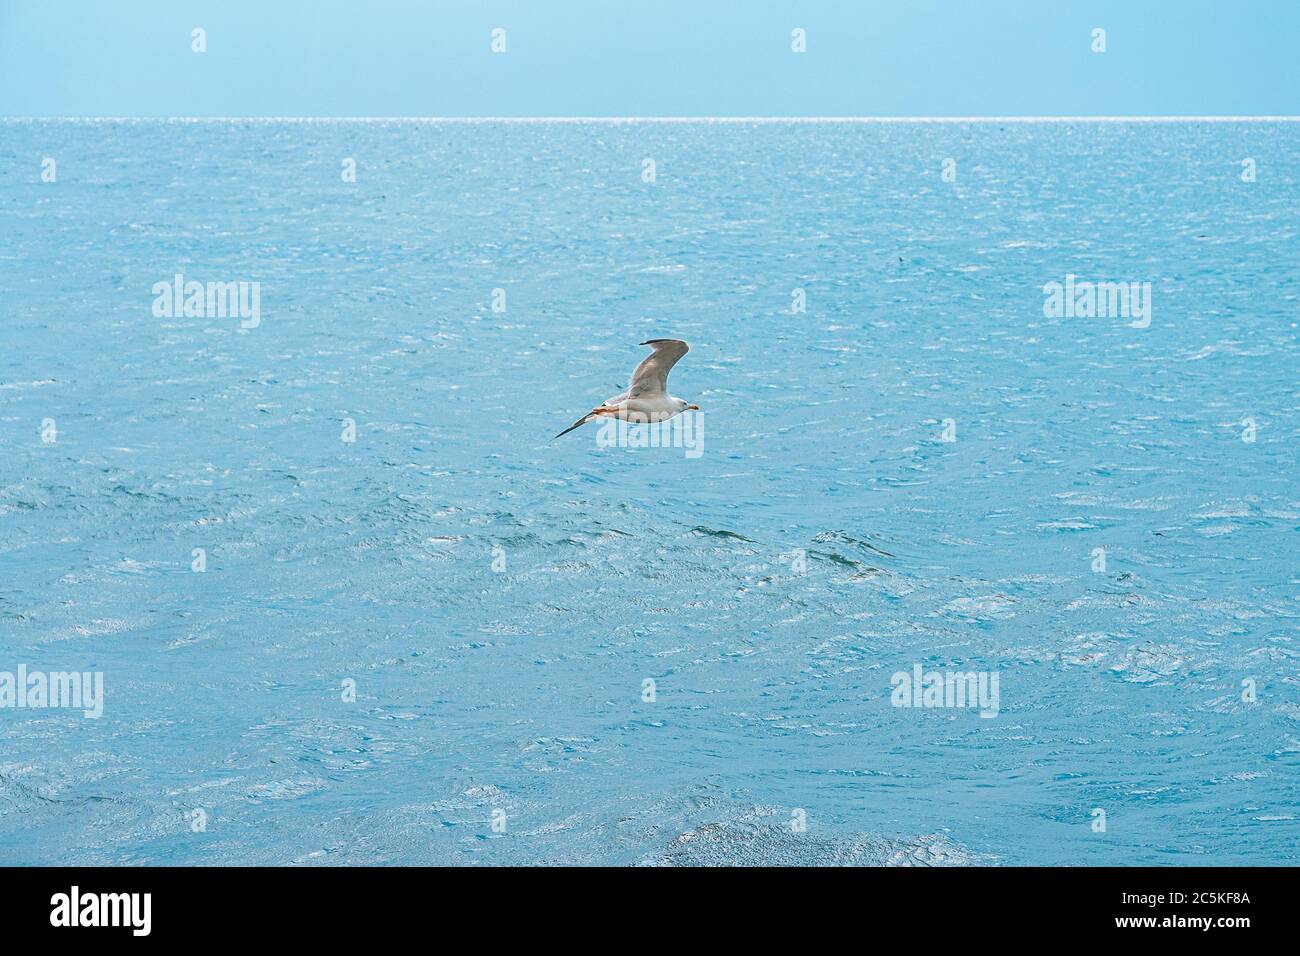 Sea gull fly against the blue ocean and the horizon line. Landscape of blue sea and blue sky on a sunny warm day. Stock Photo